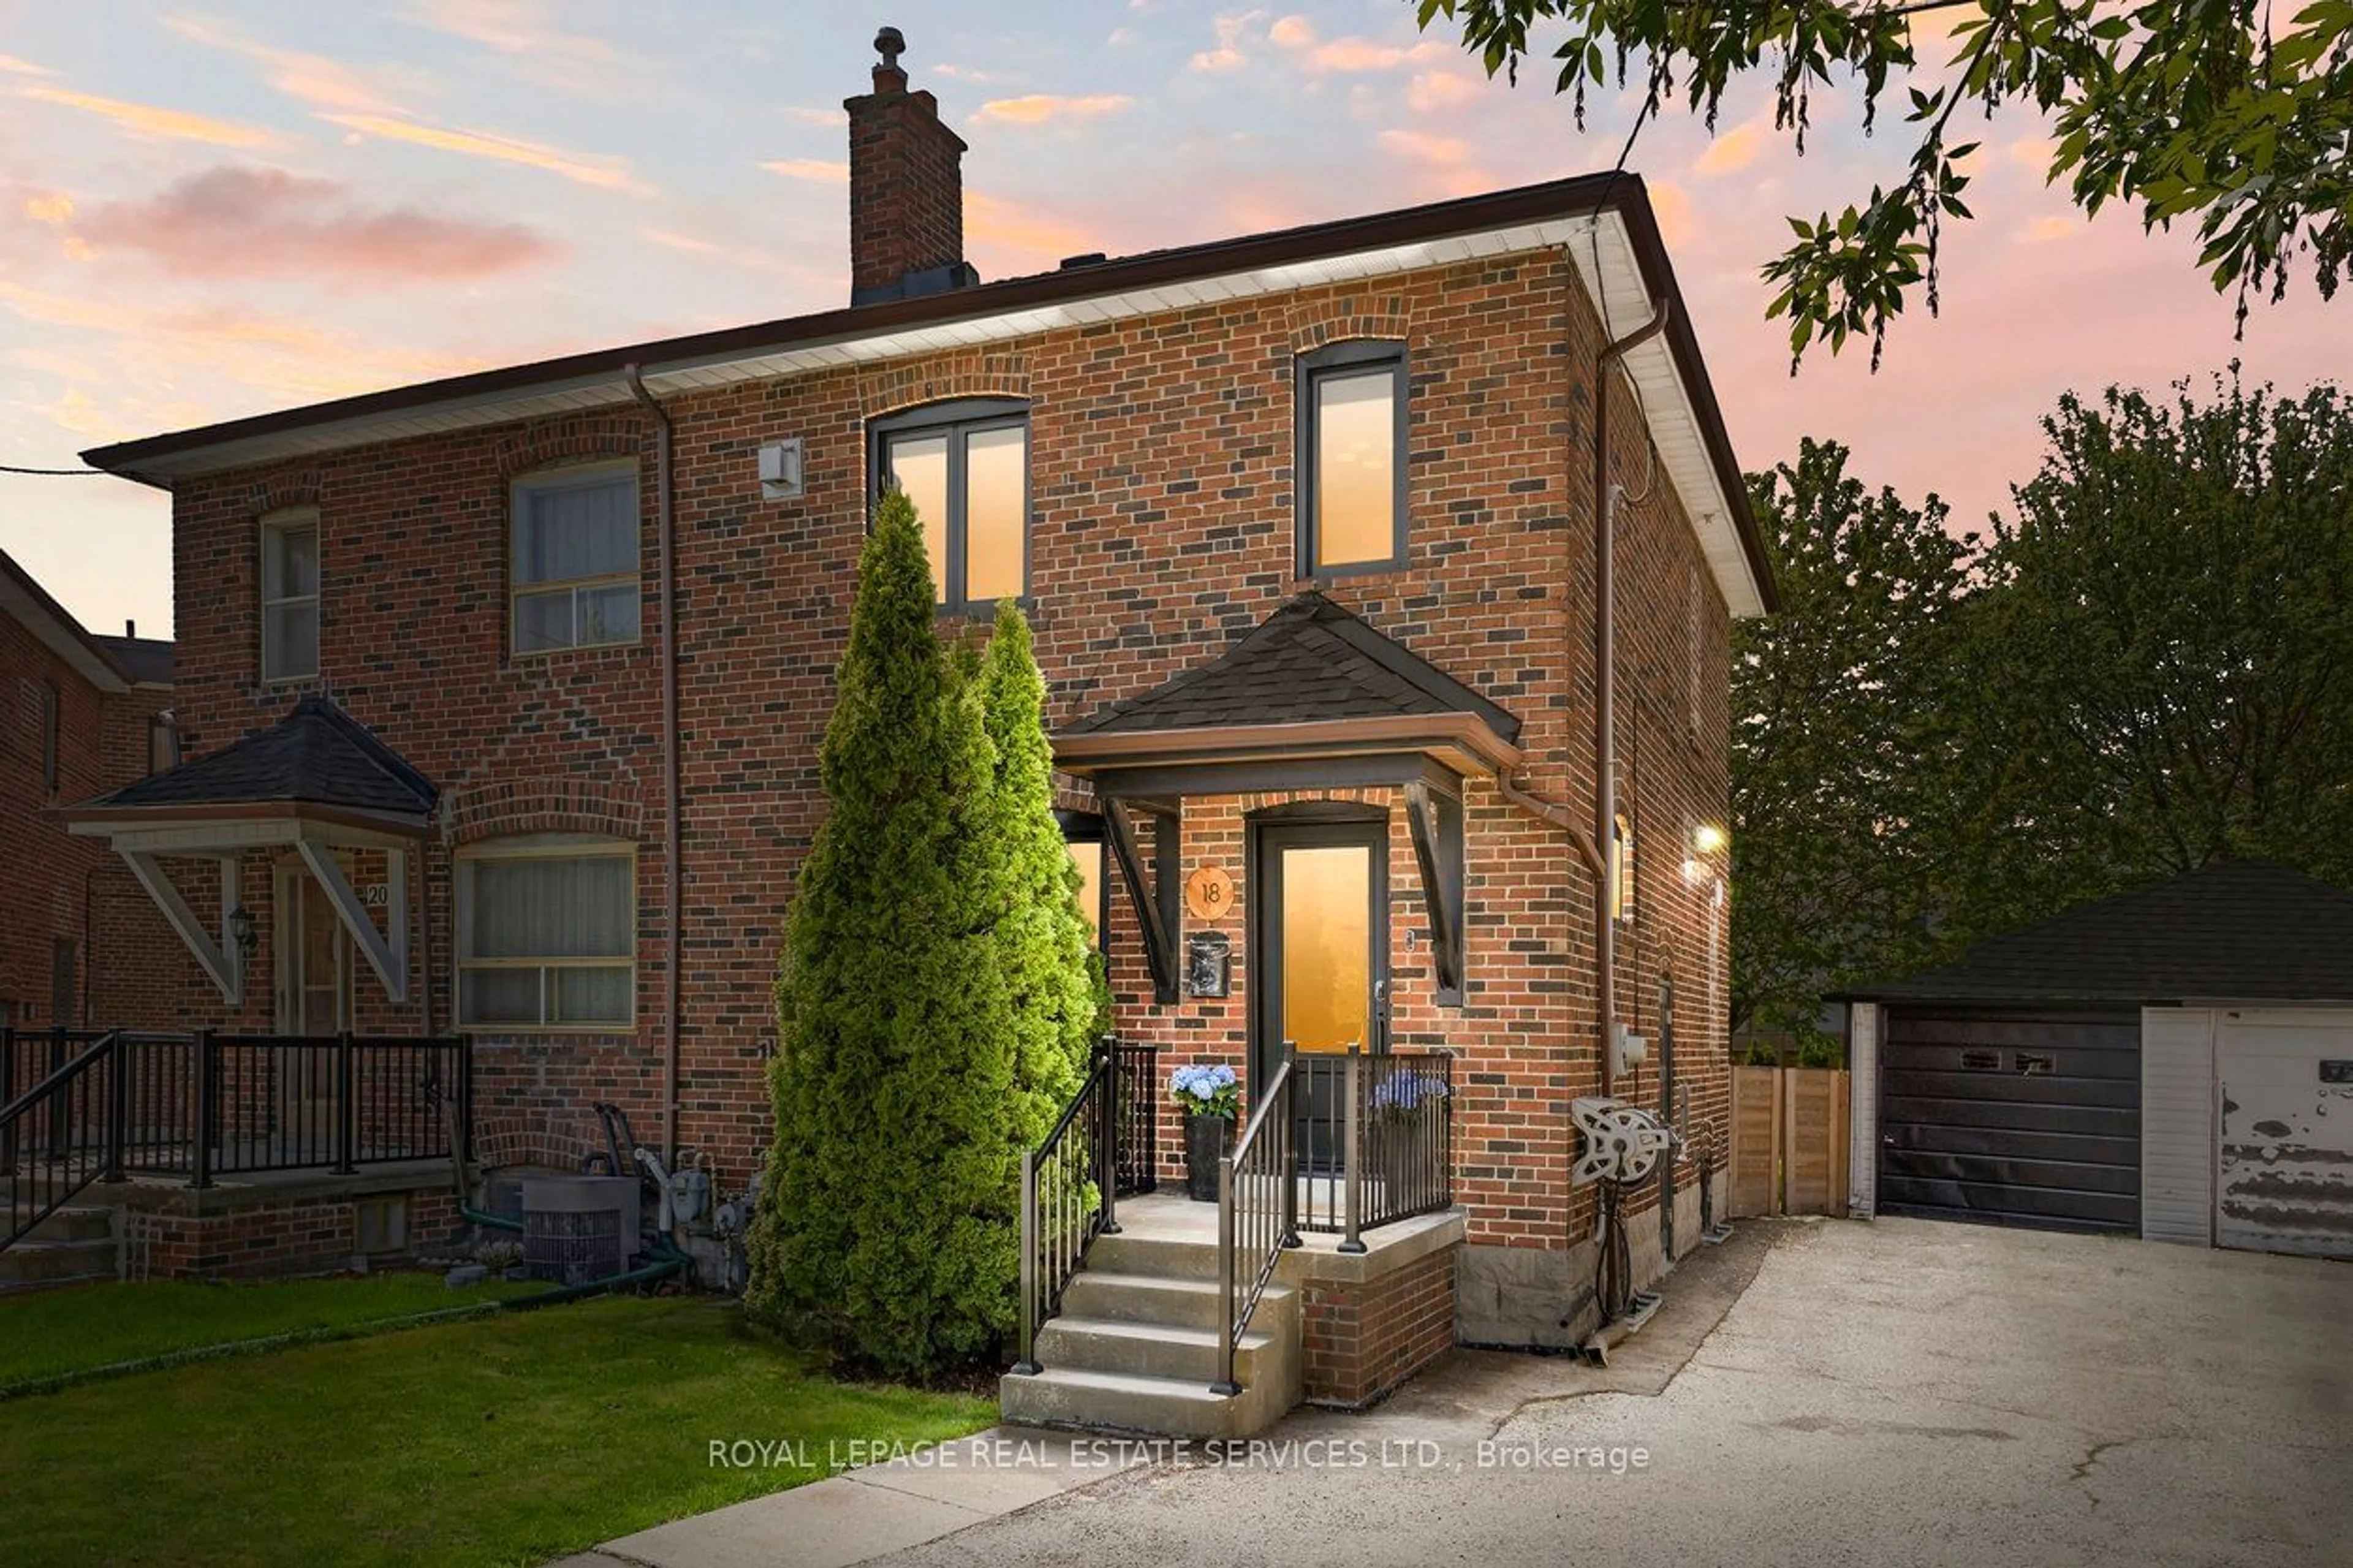 Home with brick exterior material for 18 Coates Ave, Toronto Ontario M6C 1K7